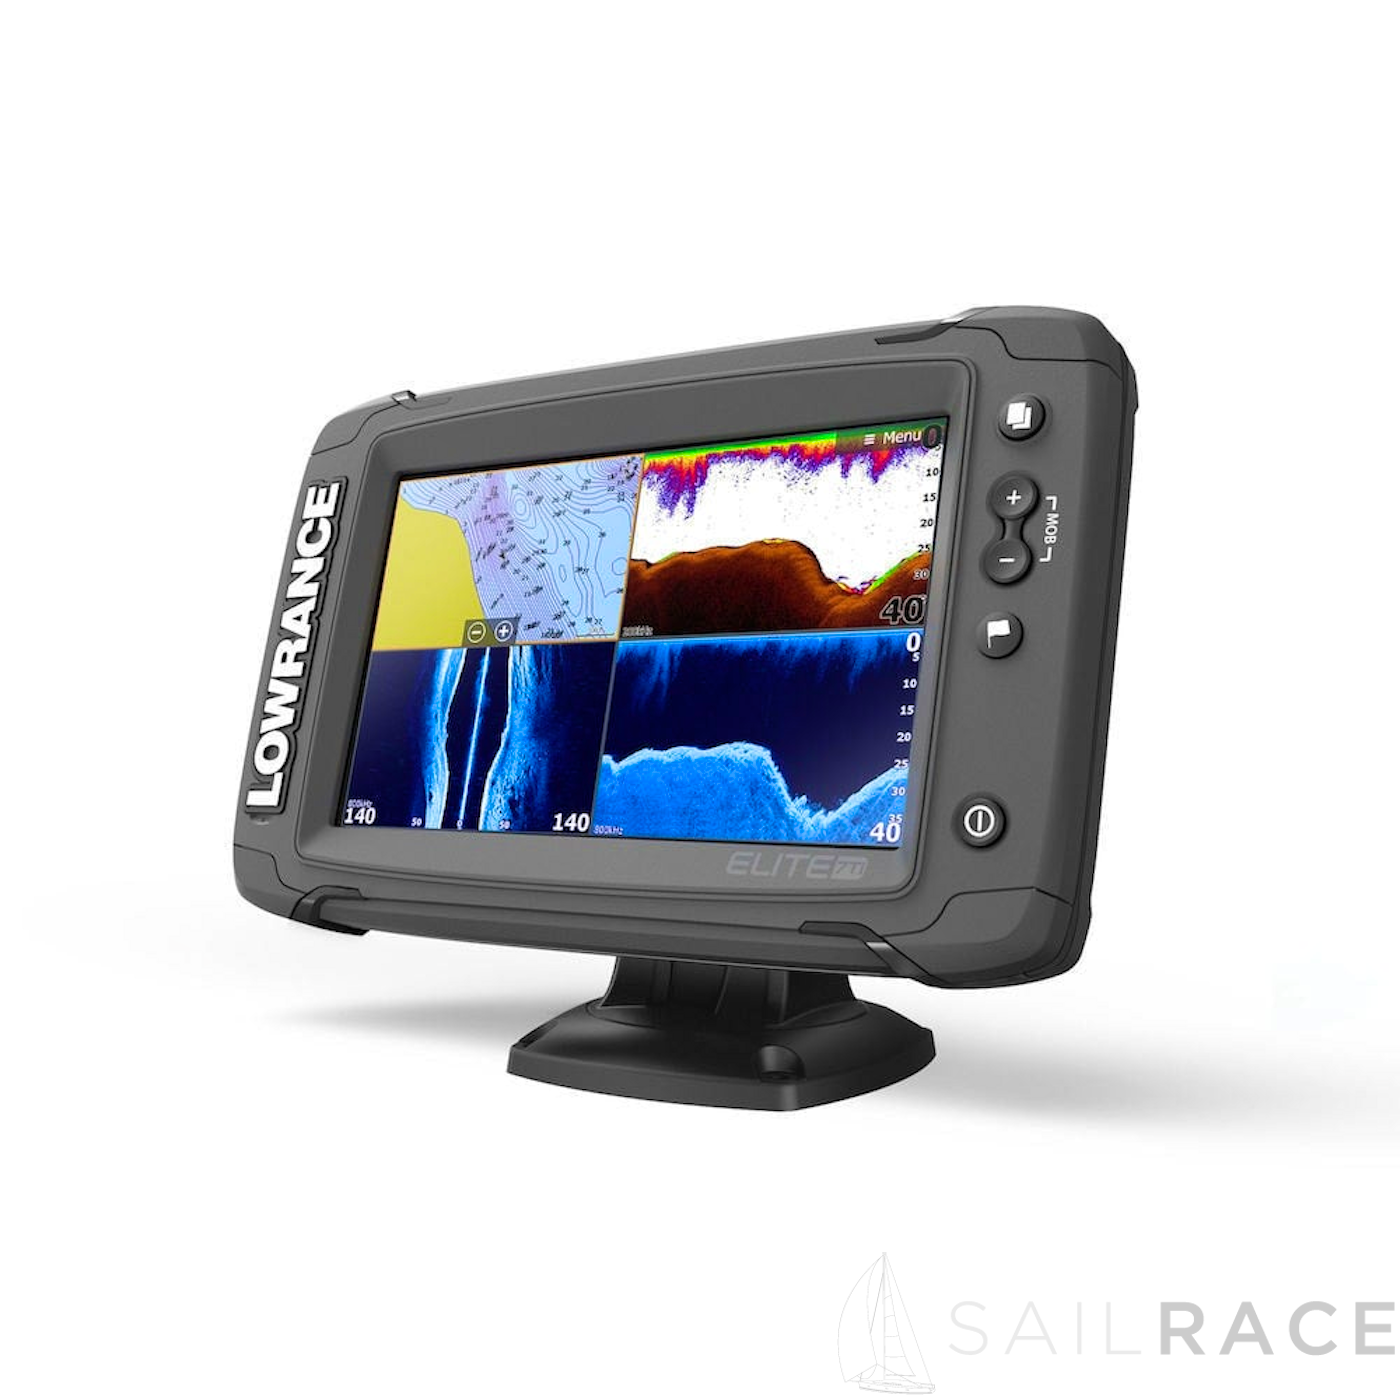 Lowrance HOOK-7 CHIRP DSI Fishfinder Chartplotter With Lake